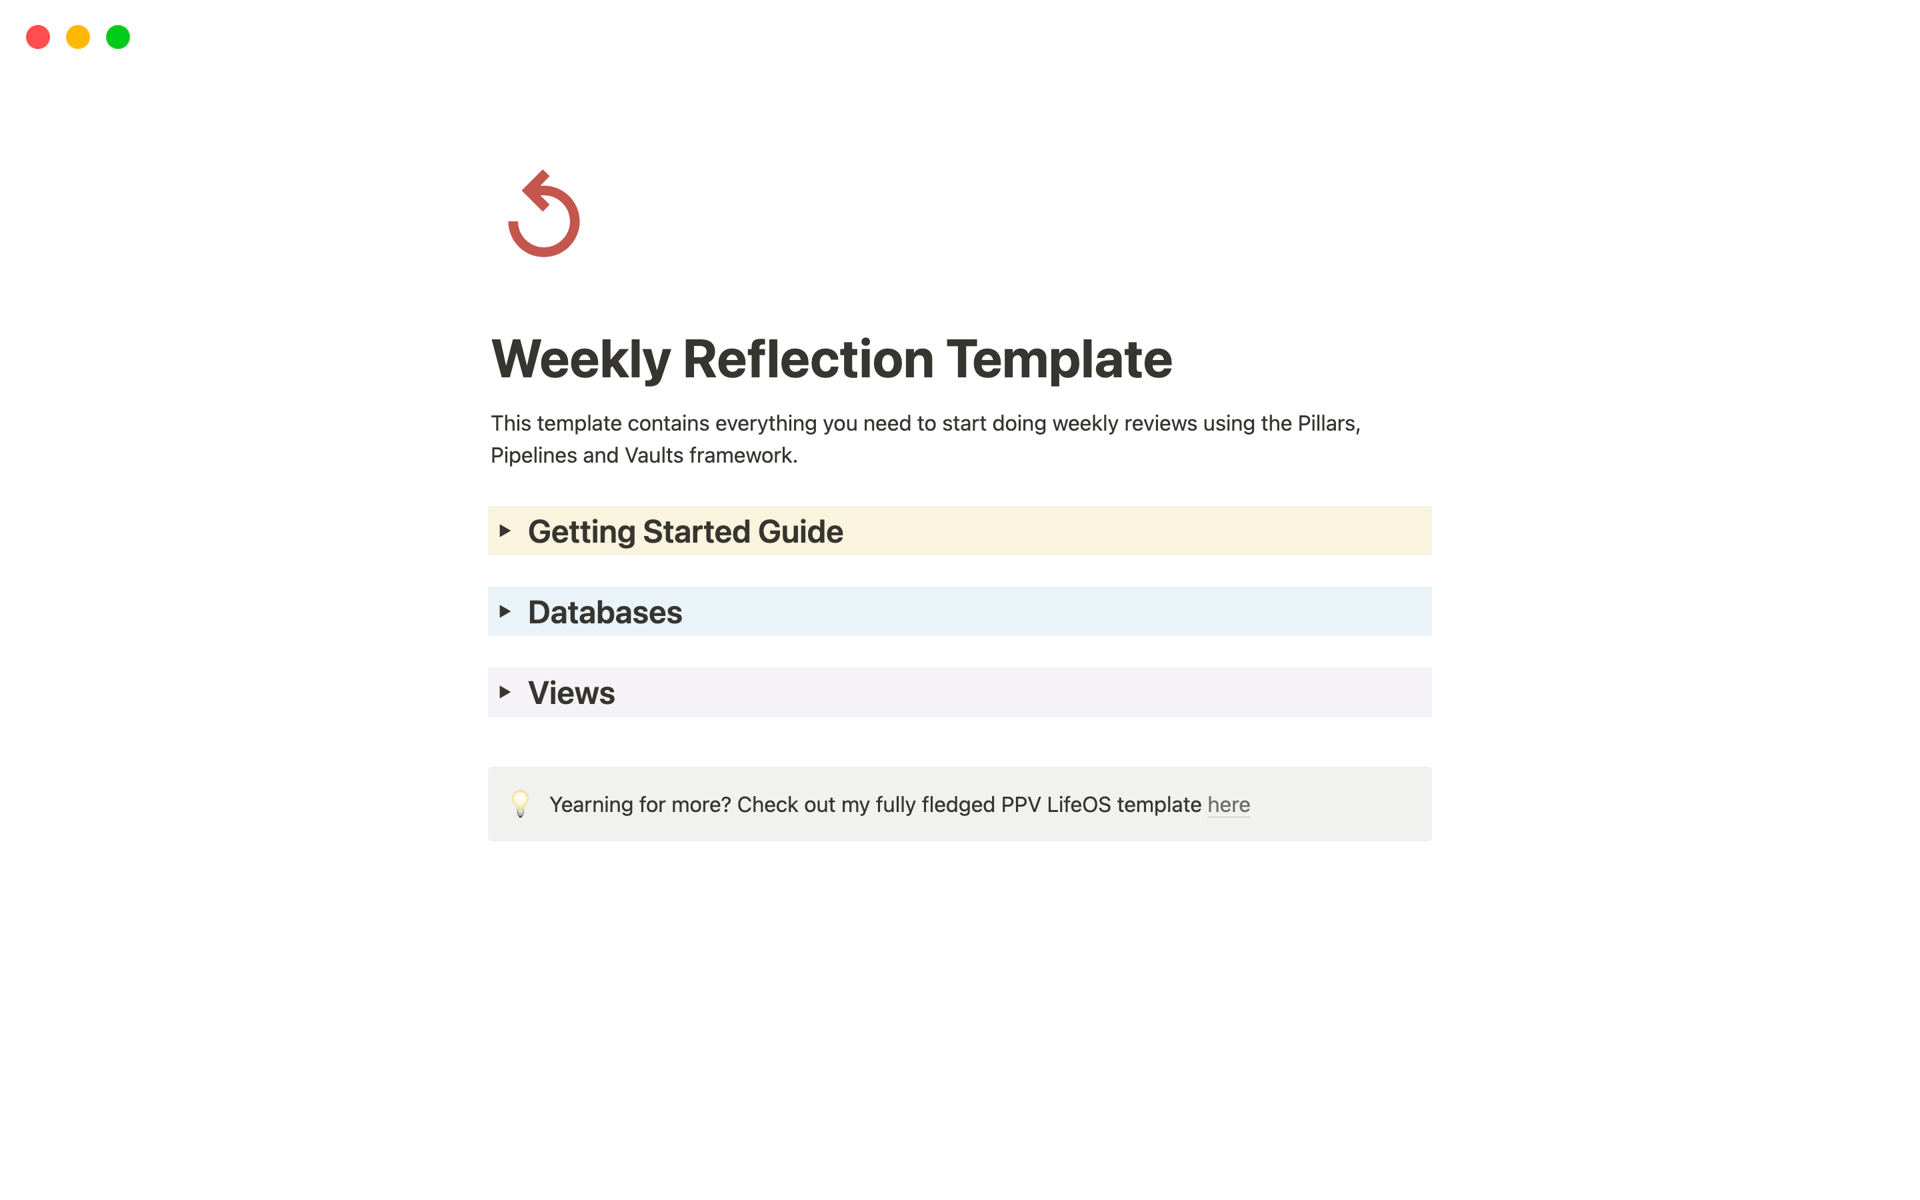 This template contains everything you need to start doing weekly reviews using the Pillars, Pipelines and Vaults framework. 